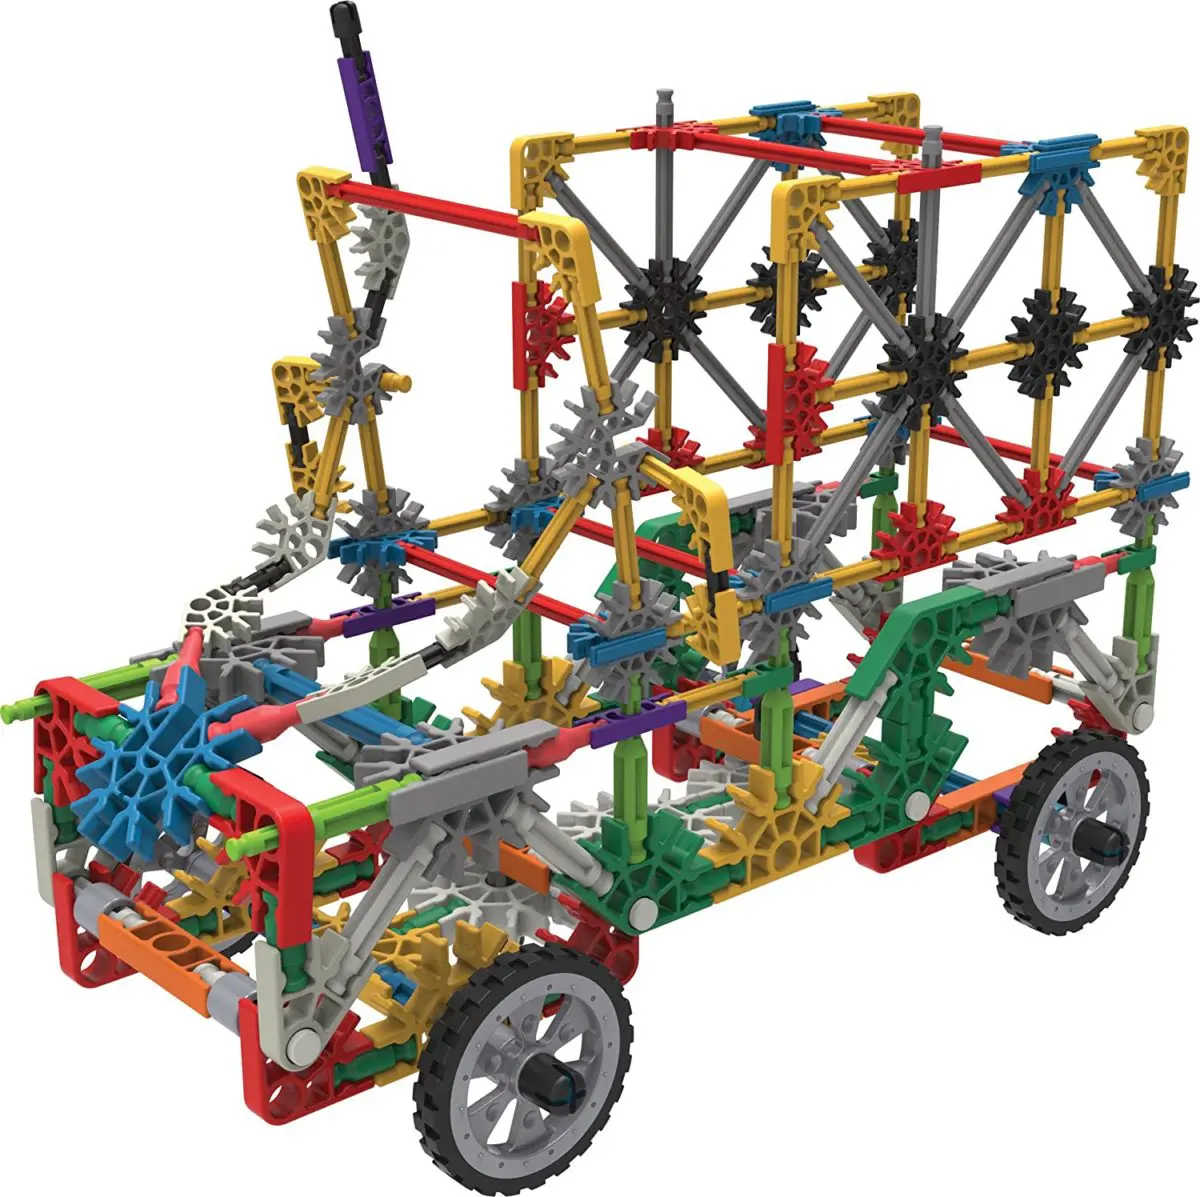 K’NEX 35 Model Building Set - Top Toys and Gifts for Nine Year Old Boys 2